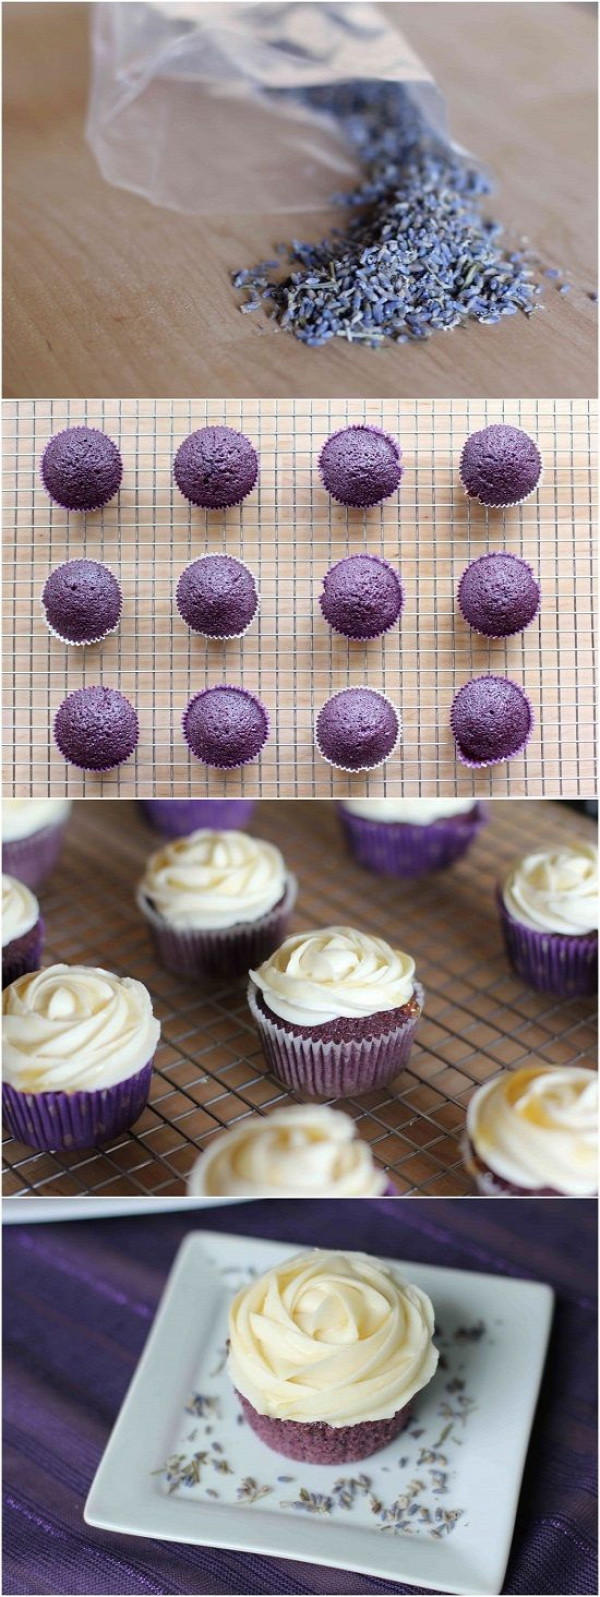 Lavender Cupcakes with Honey Frosting. Because @Amanda L requested